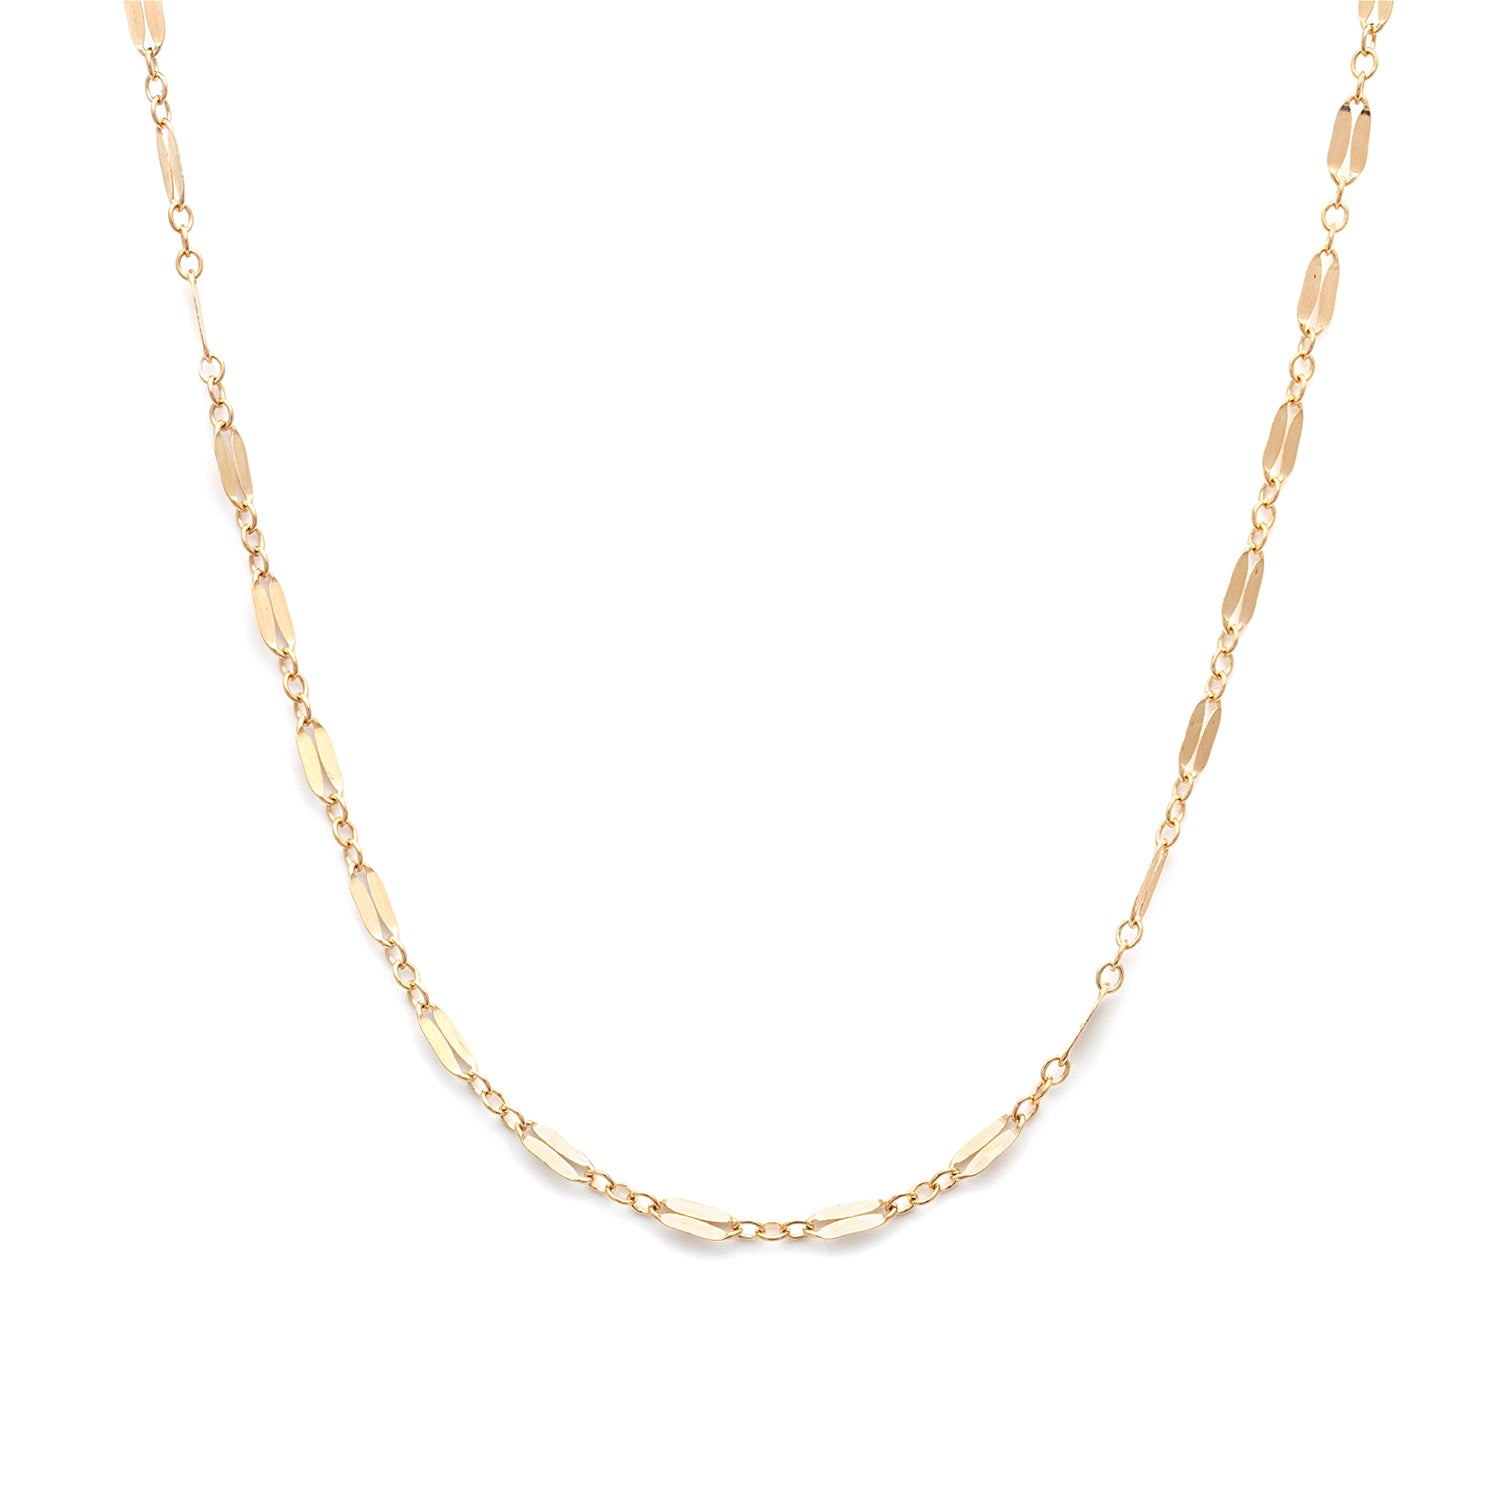 Leah knot multi chain necklace – Yeon